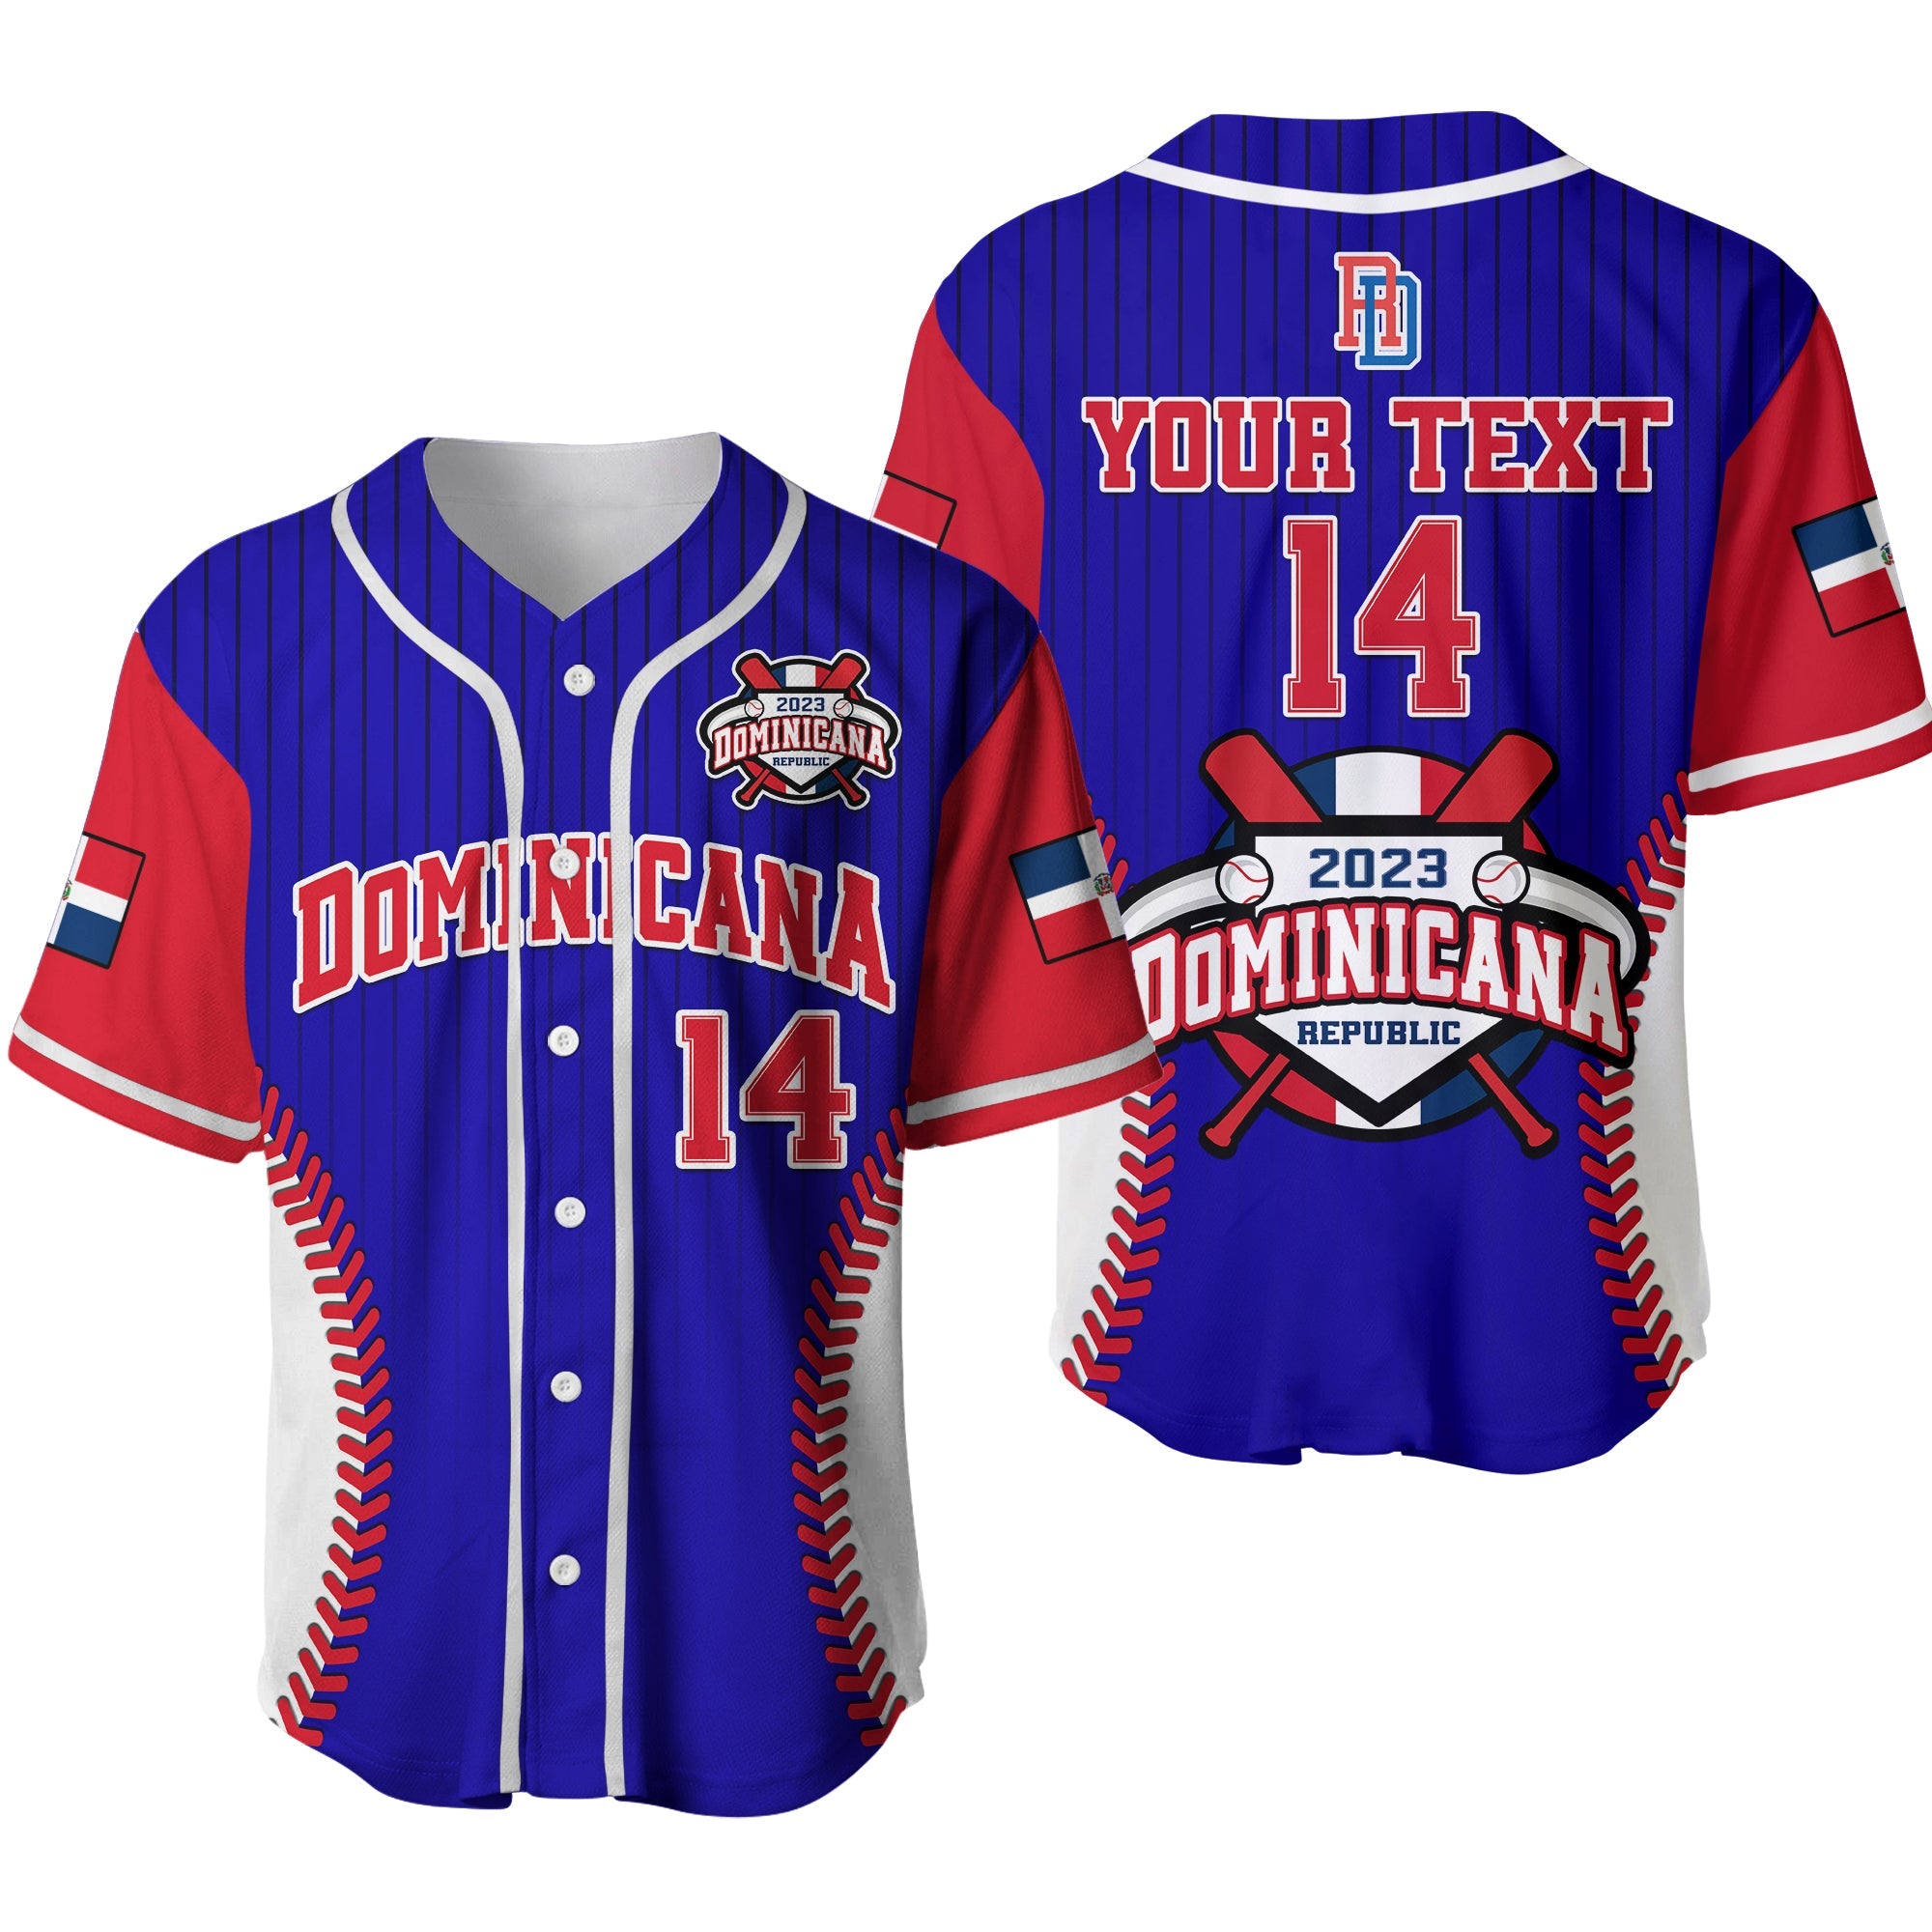 custom-text-and-number-dominican-republic-baseball-2023-baseball-jersey-version-blue-ver02